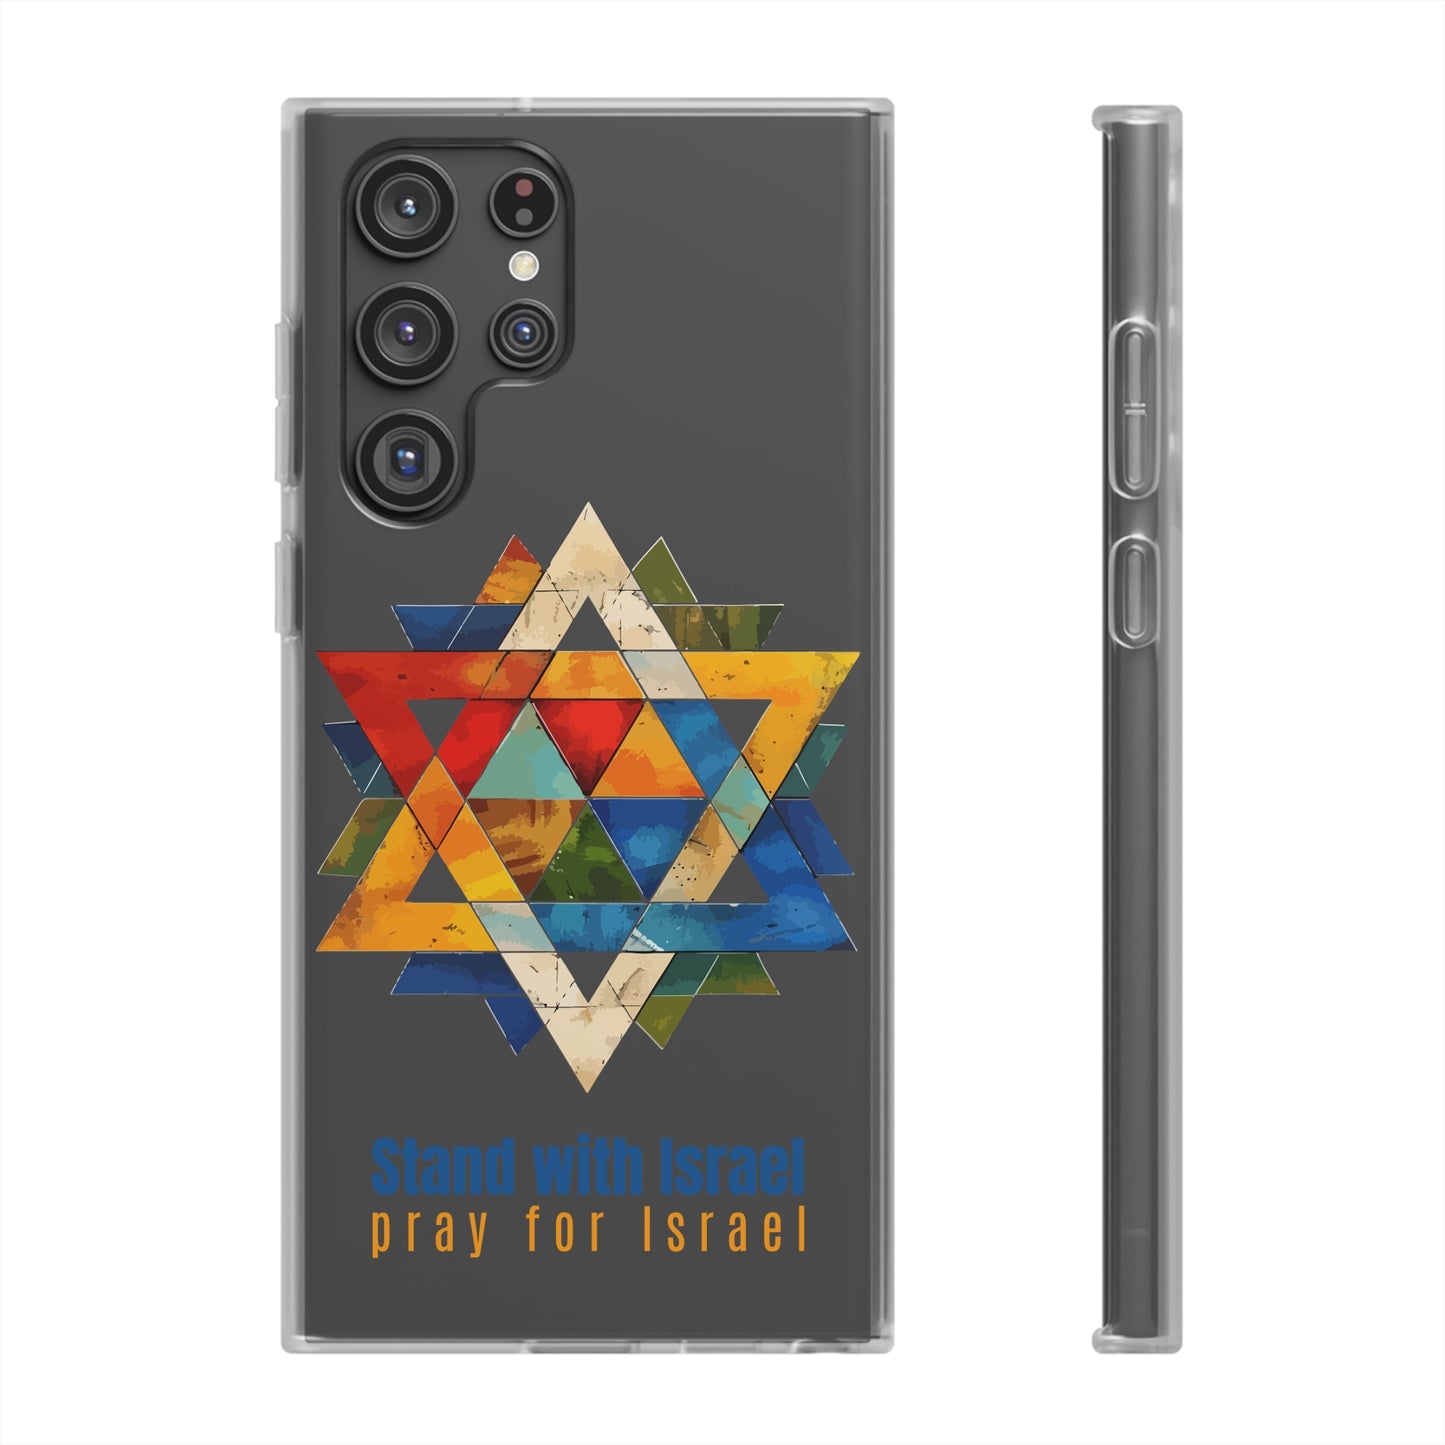 Stand with Israel, Pray for Israel, Magen David Flexi Cases